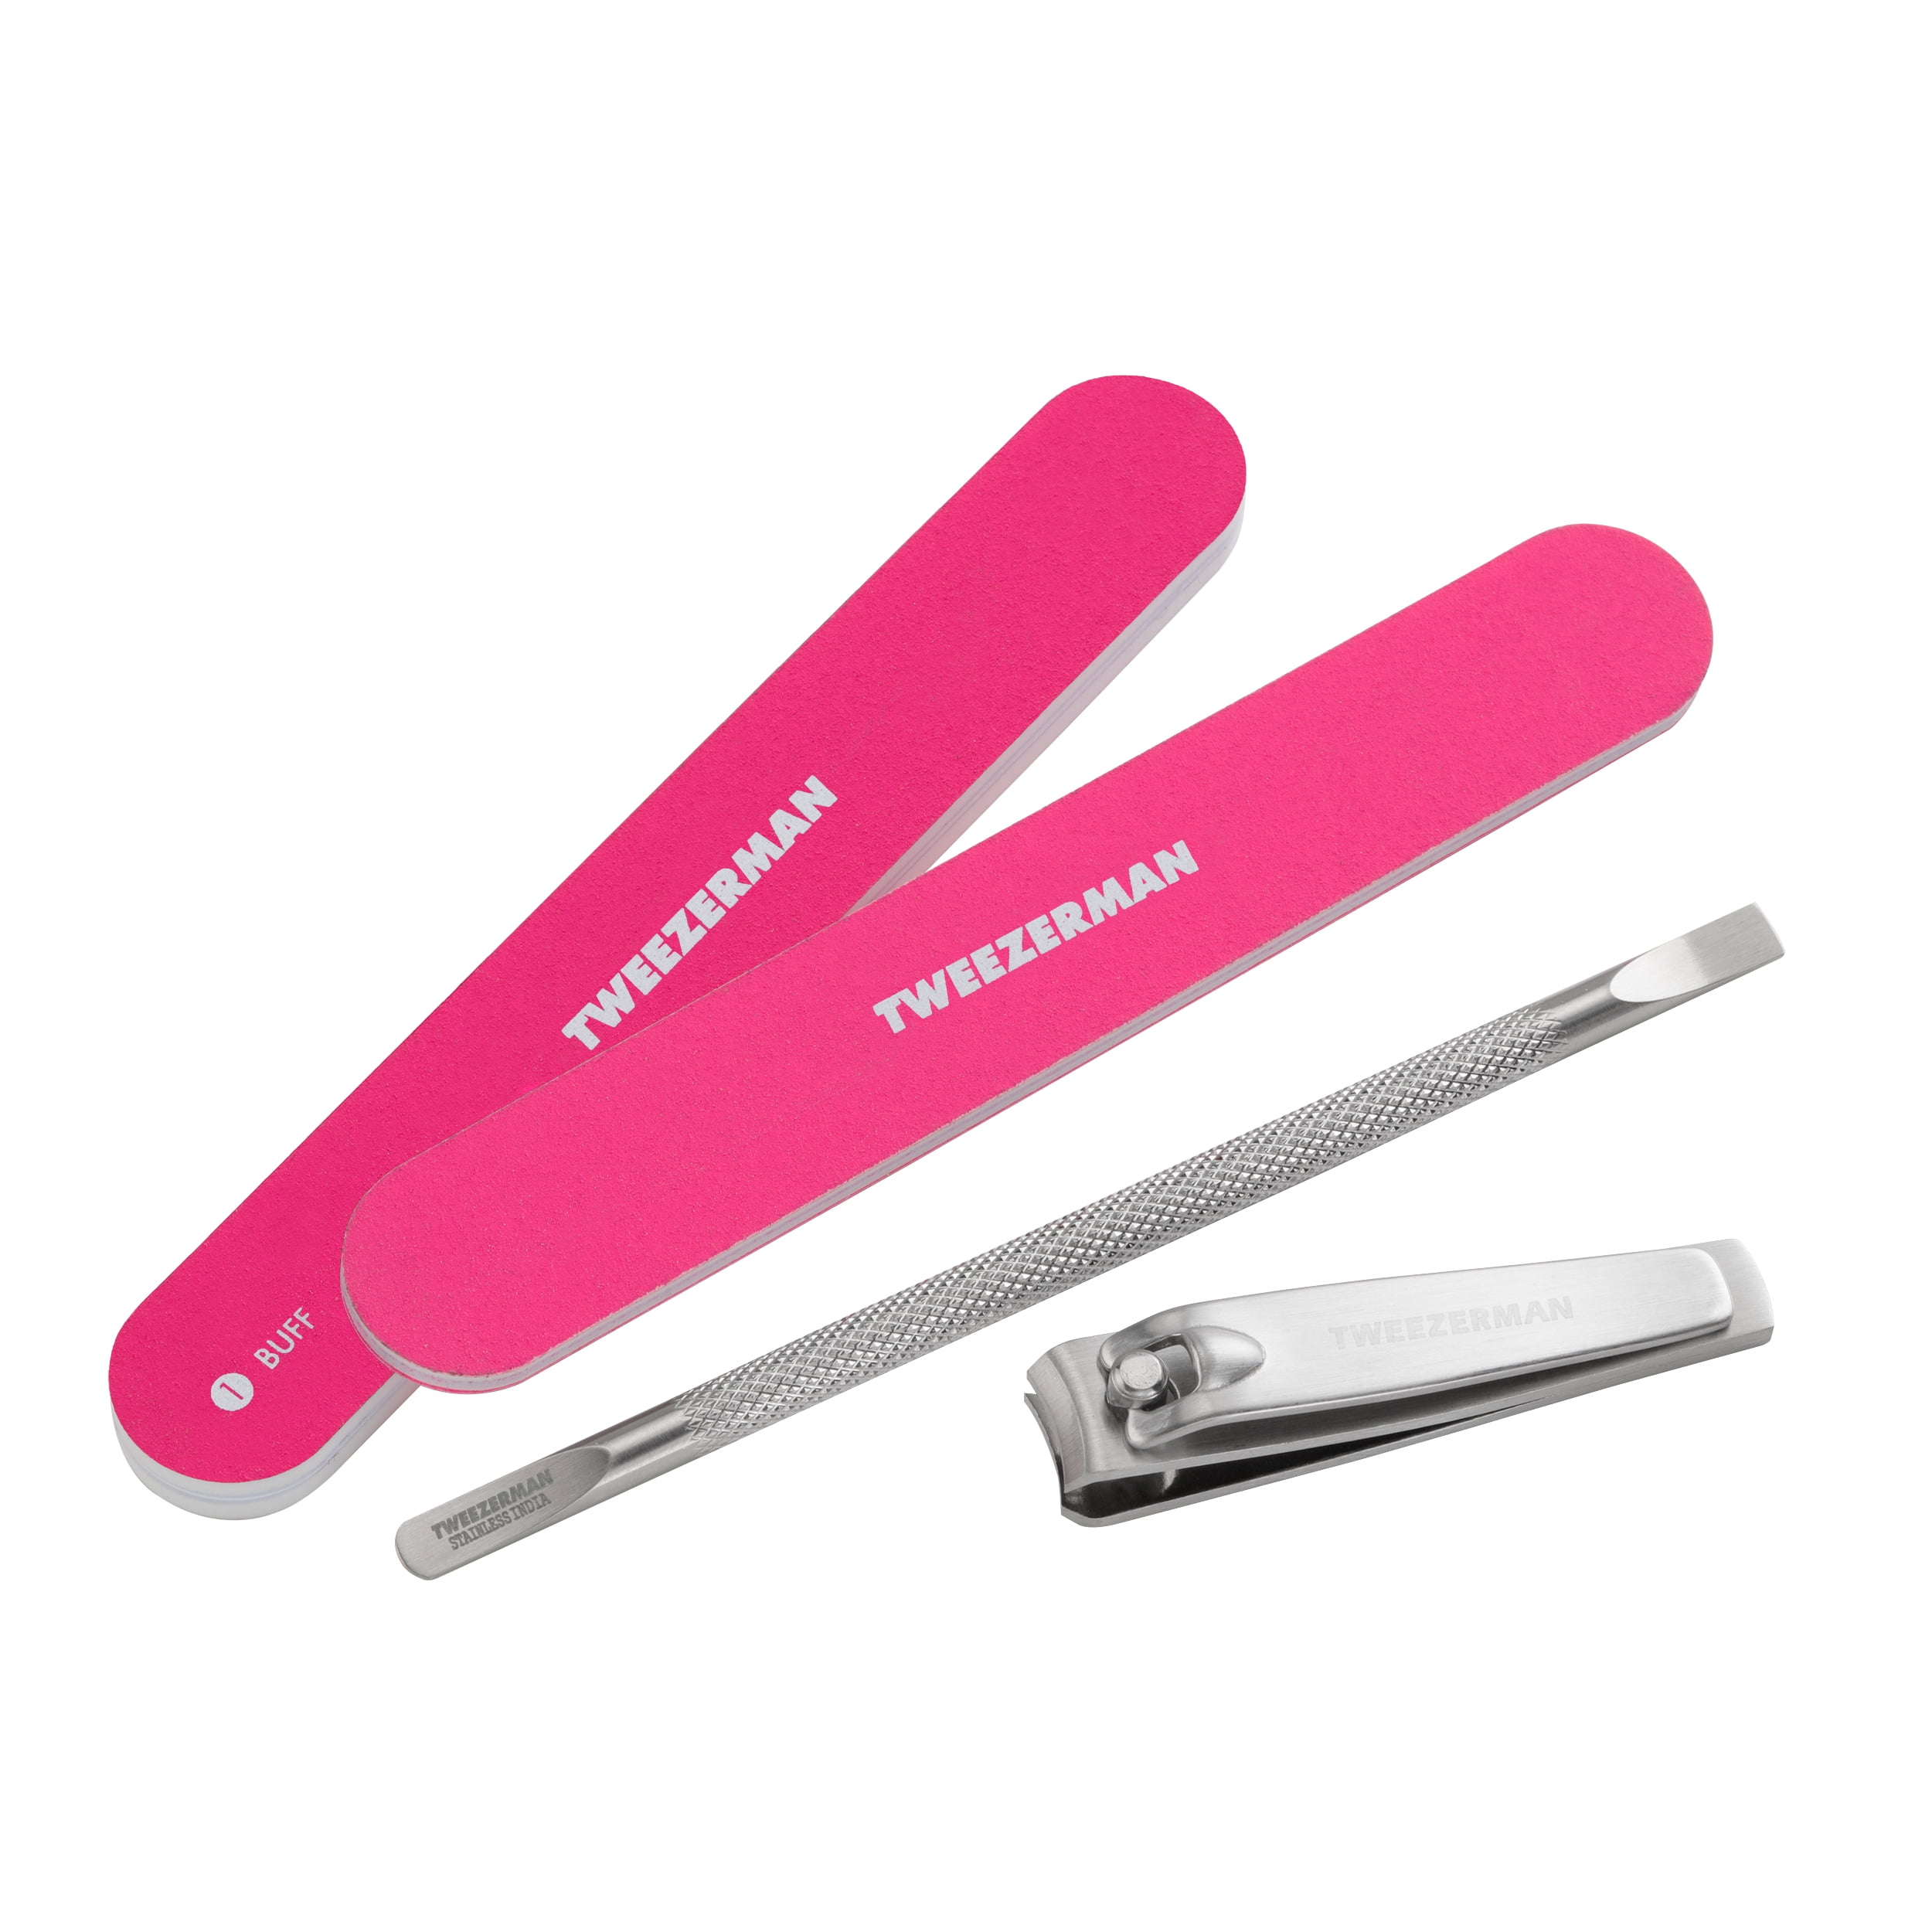 Tweezerman Ultimate Neon Pink Manicure Set Includes a Nail Pushy, Nail  Clipper, Nail Buff and Nail File | Nagelscheren